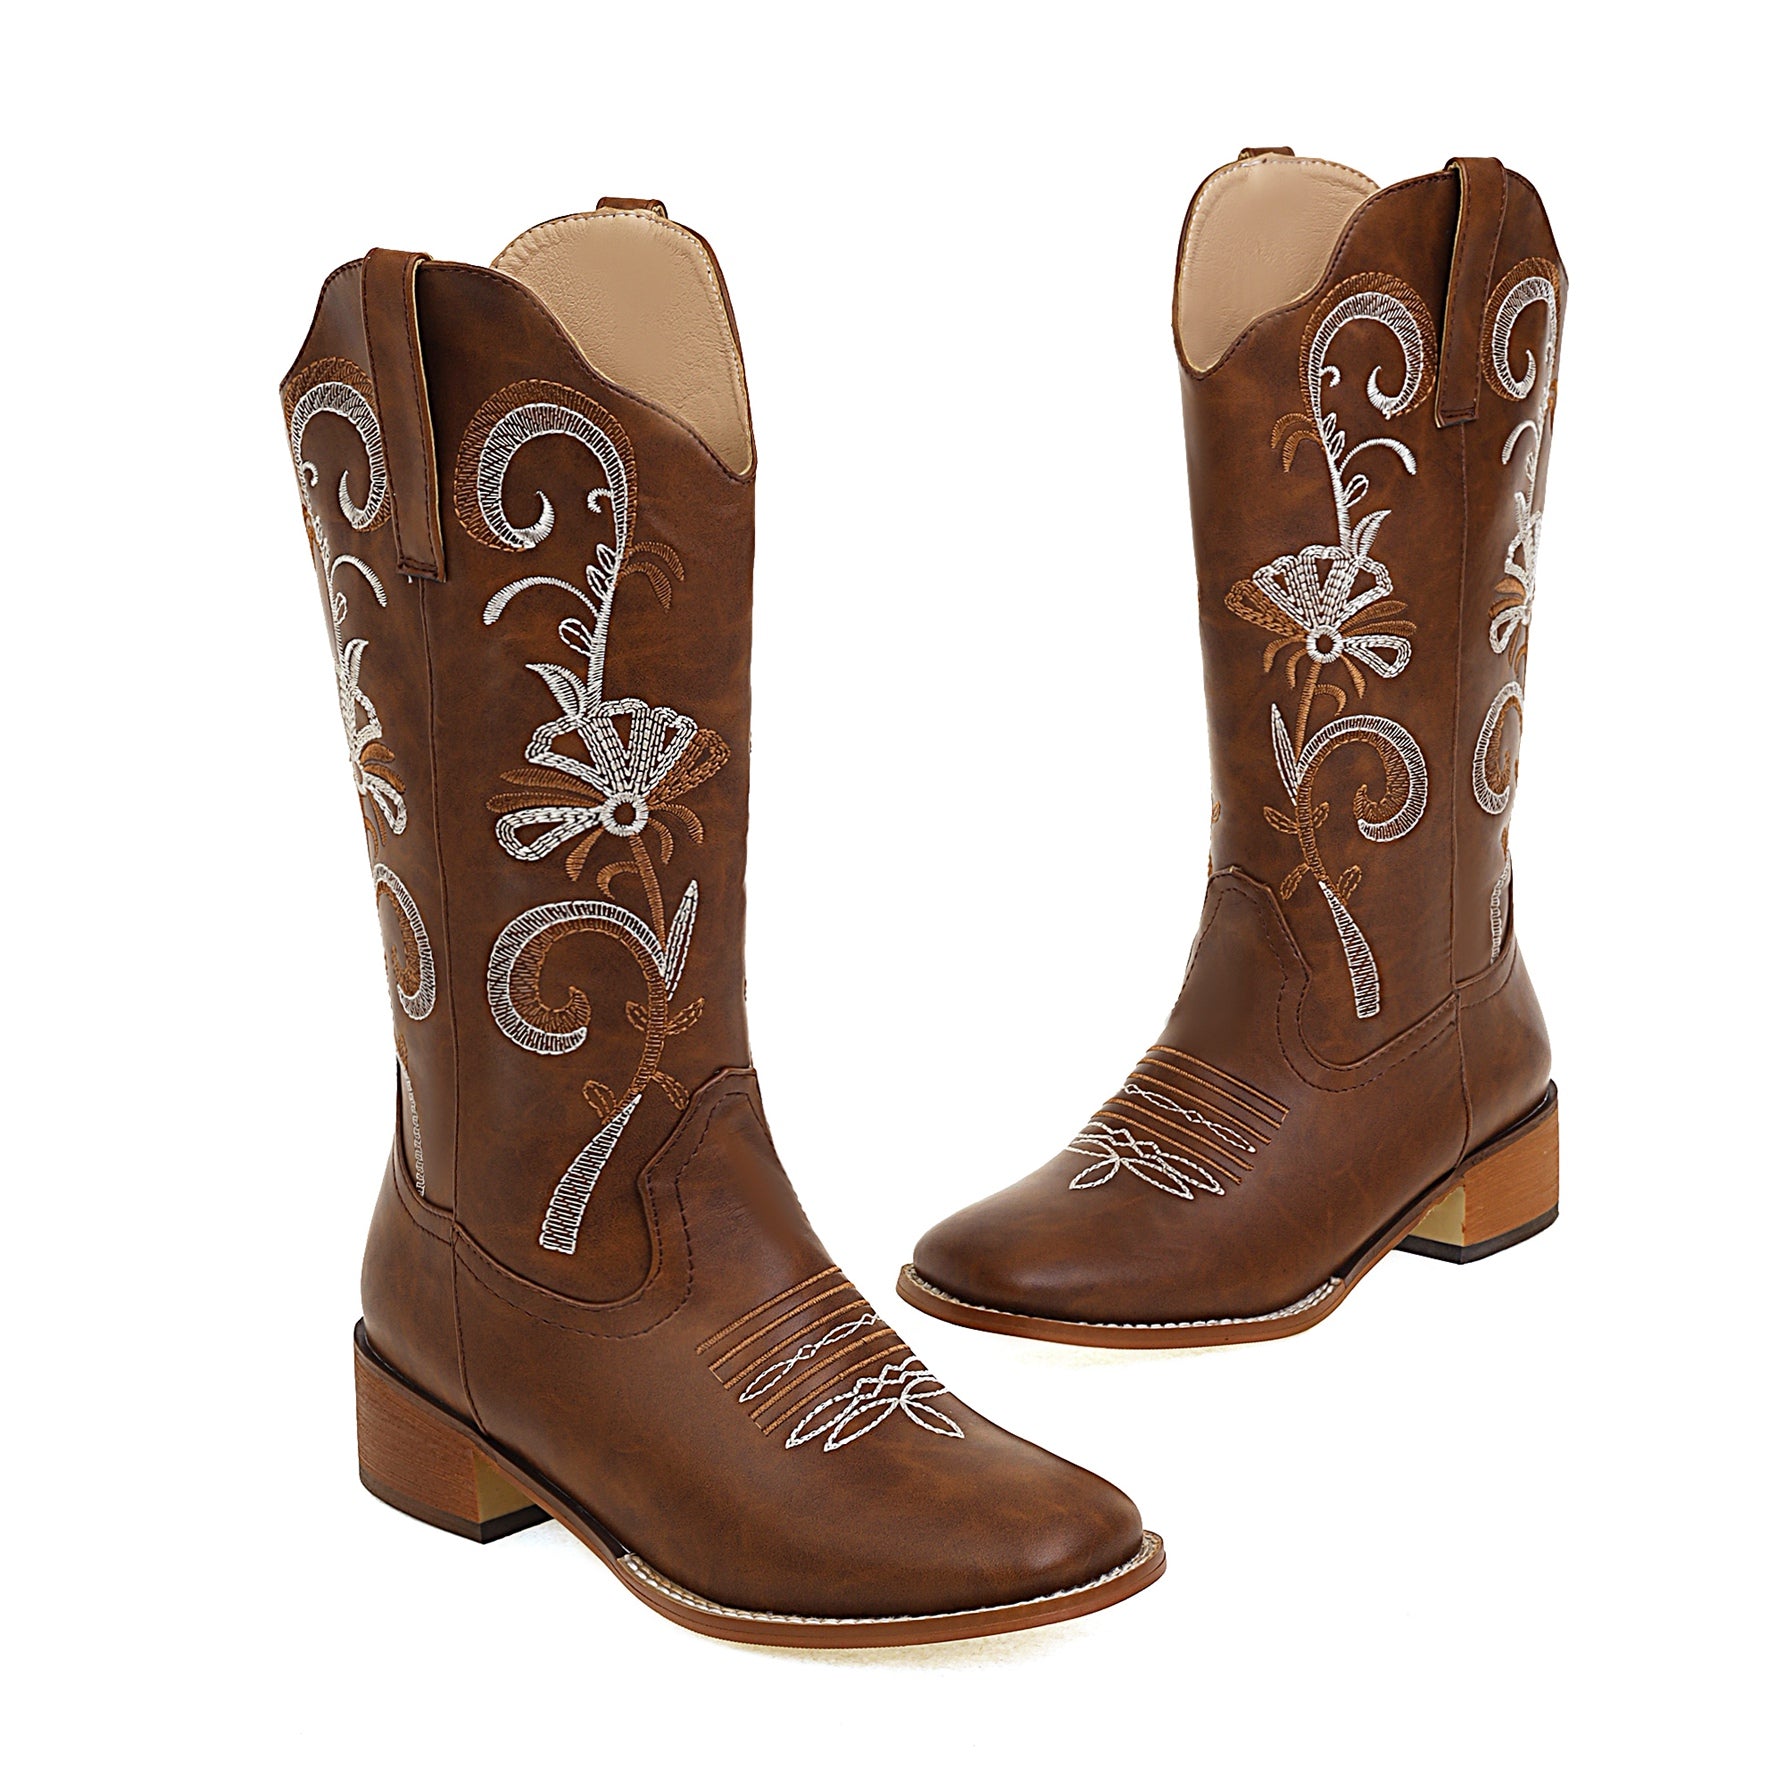 Bigsizeheels Western vintage embroidery boots - Brown freeshipping - bigsizeheel®-size5-size15 -All Plus Sizes Available!